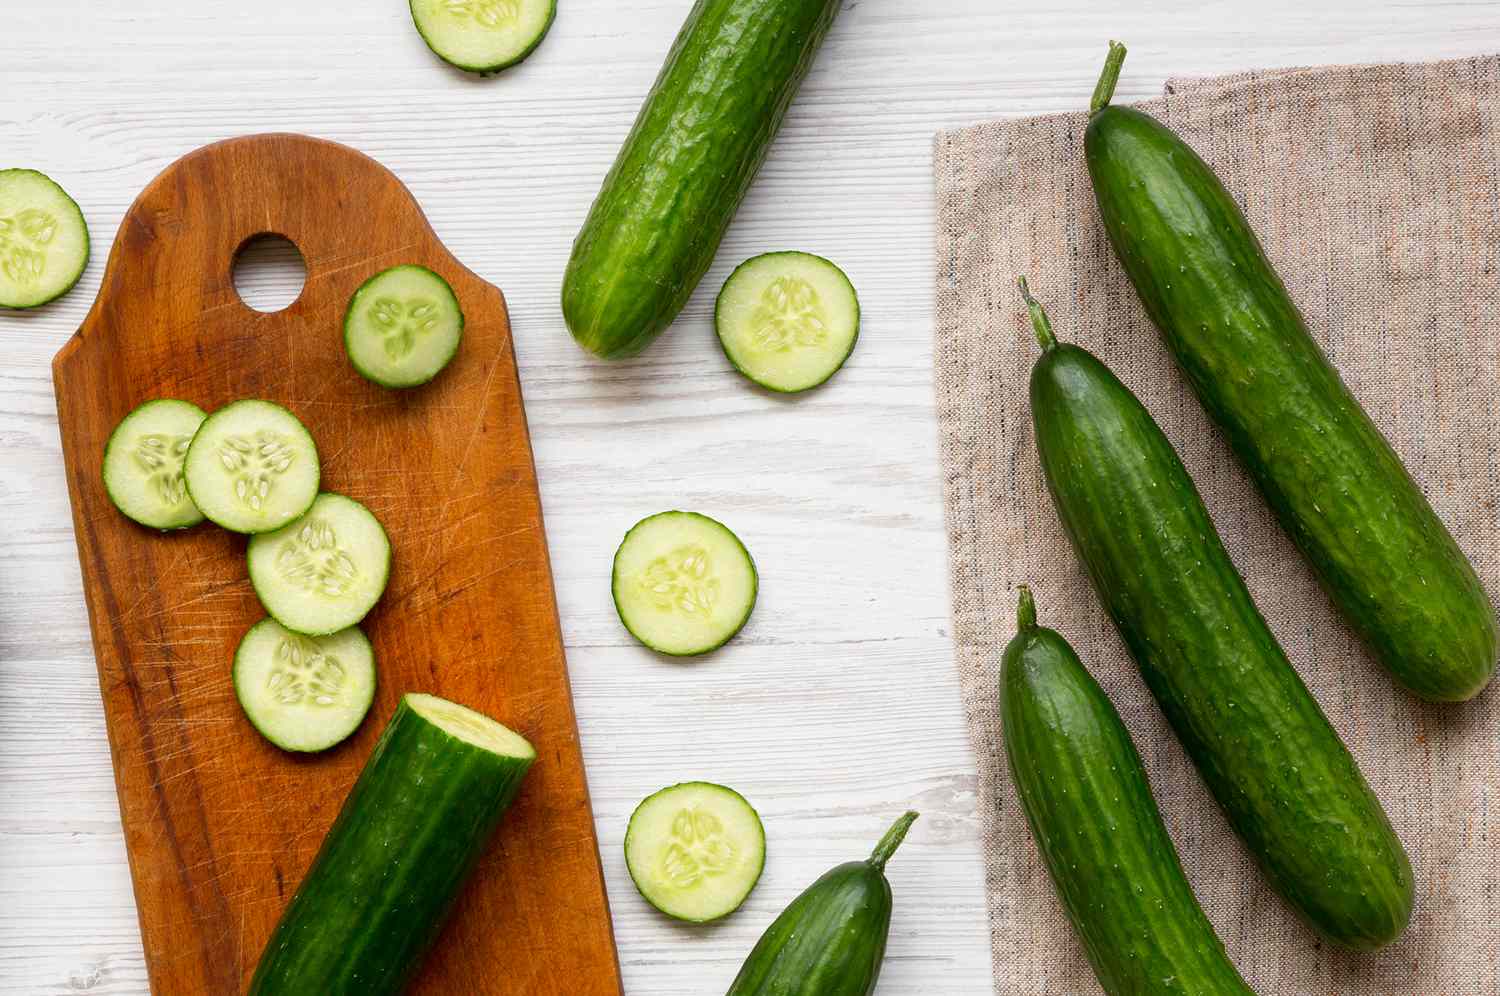 Cucumbers and cutting board on table